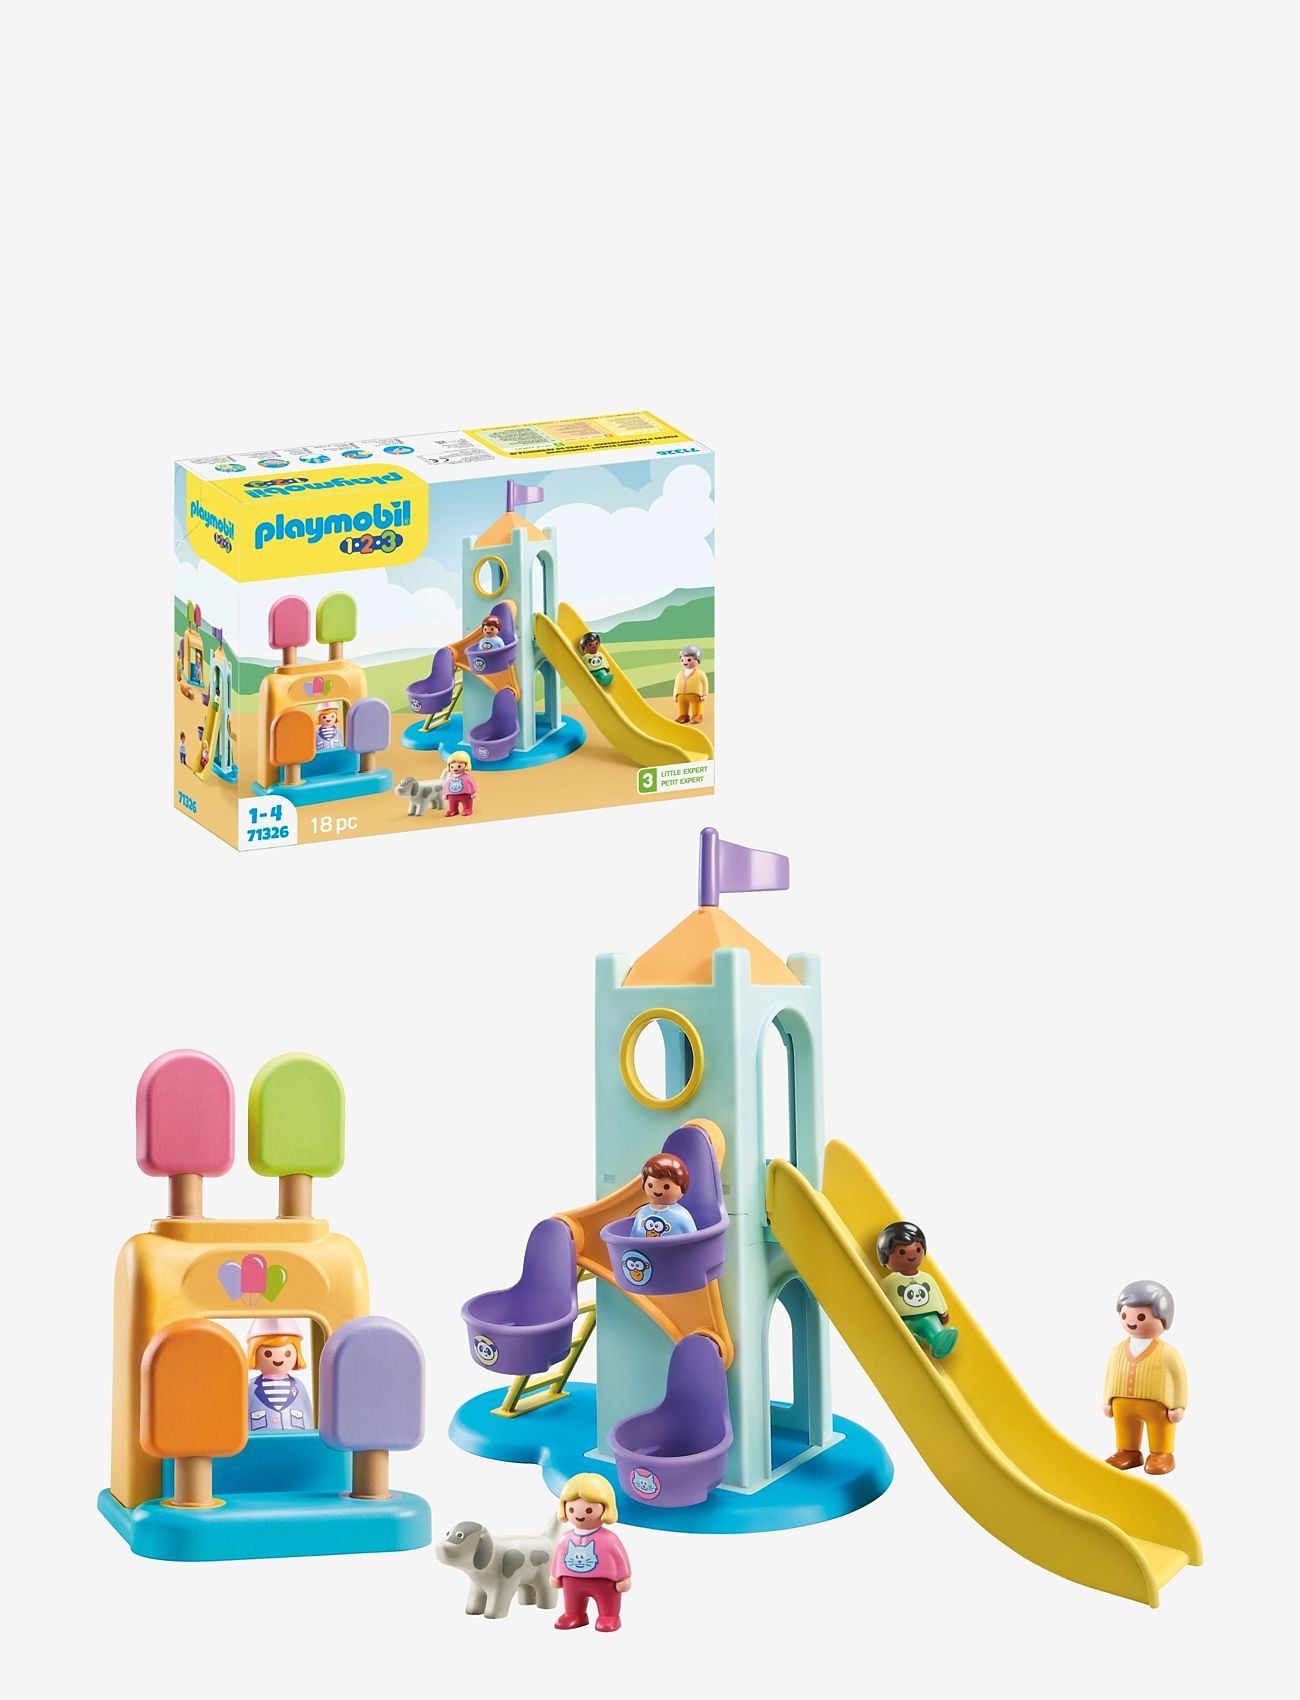 PLAYMOBIL - PLAYMOBIL 1.2.3: Adventure Tower with Ice Cream Booth - 71326 - playmobil 1.2.3 - multicolored - 0